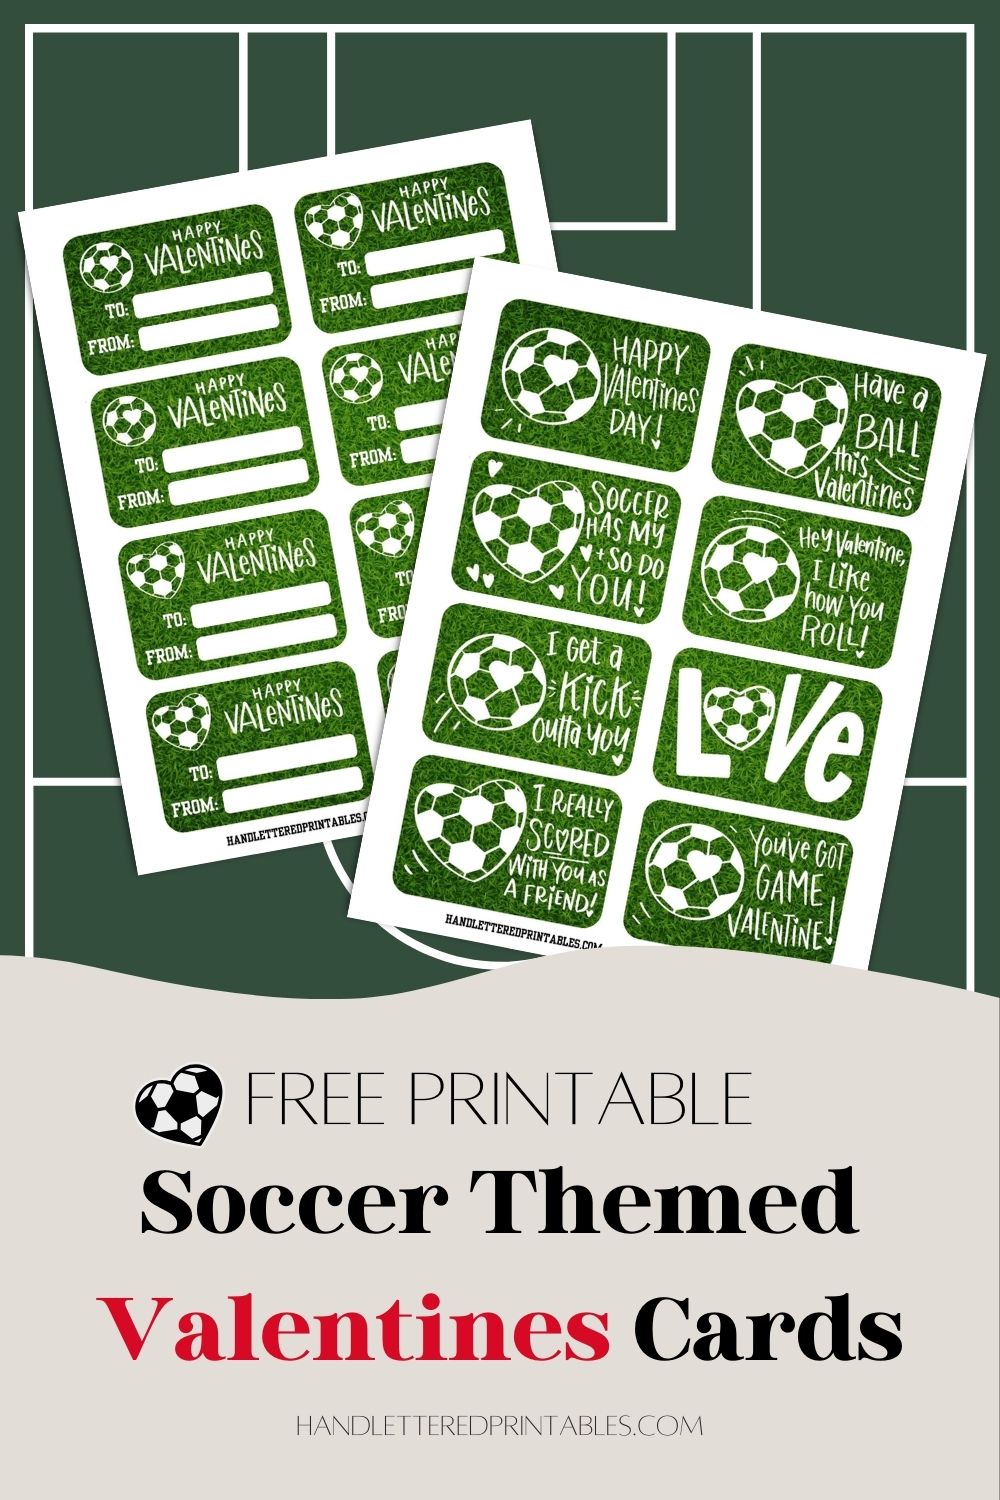 8 soccer themed valentines cards shown printed out front and back on green background. text title reads: free printable soccer themed valentines cards